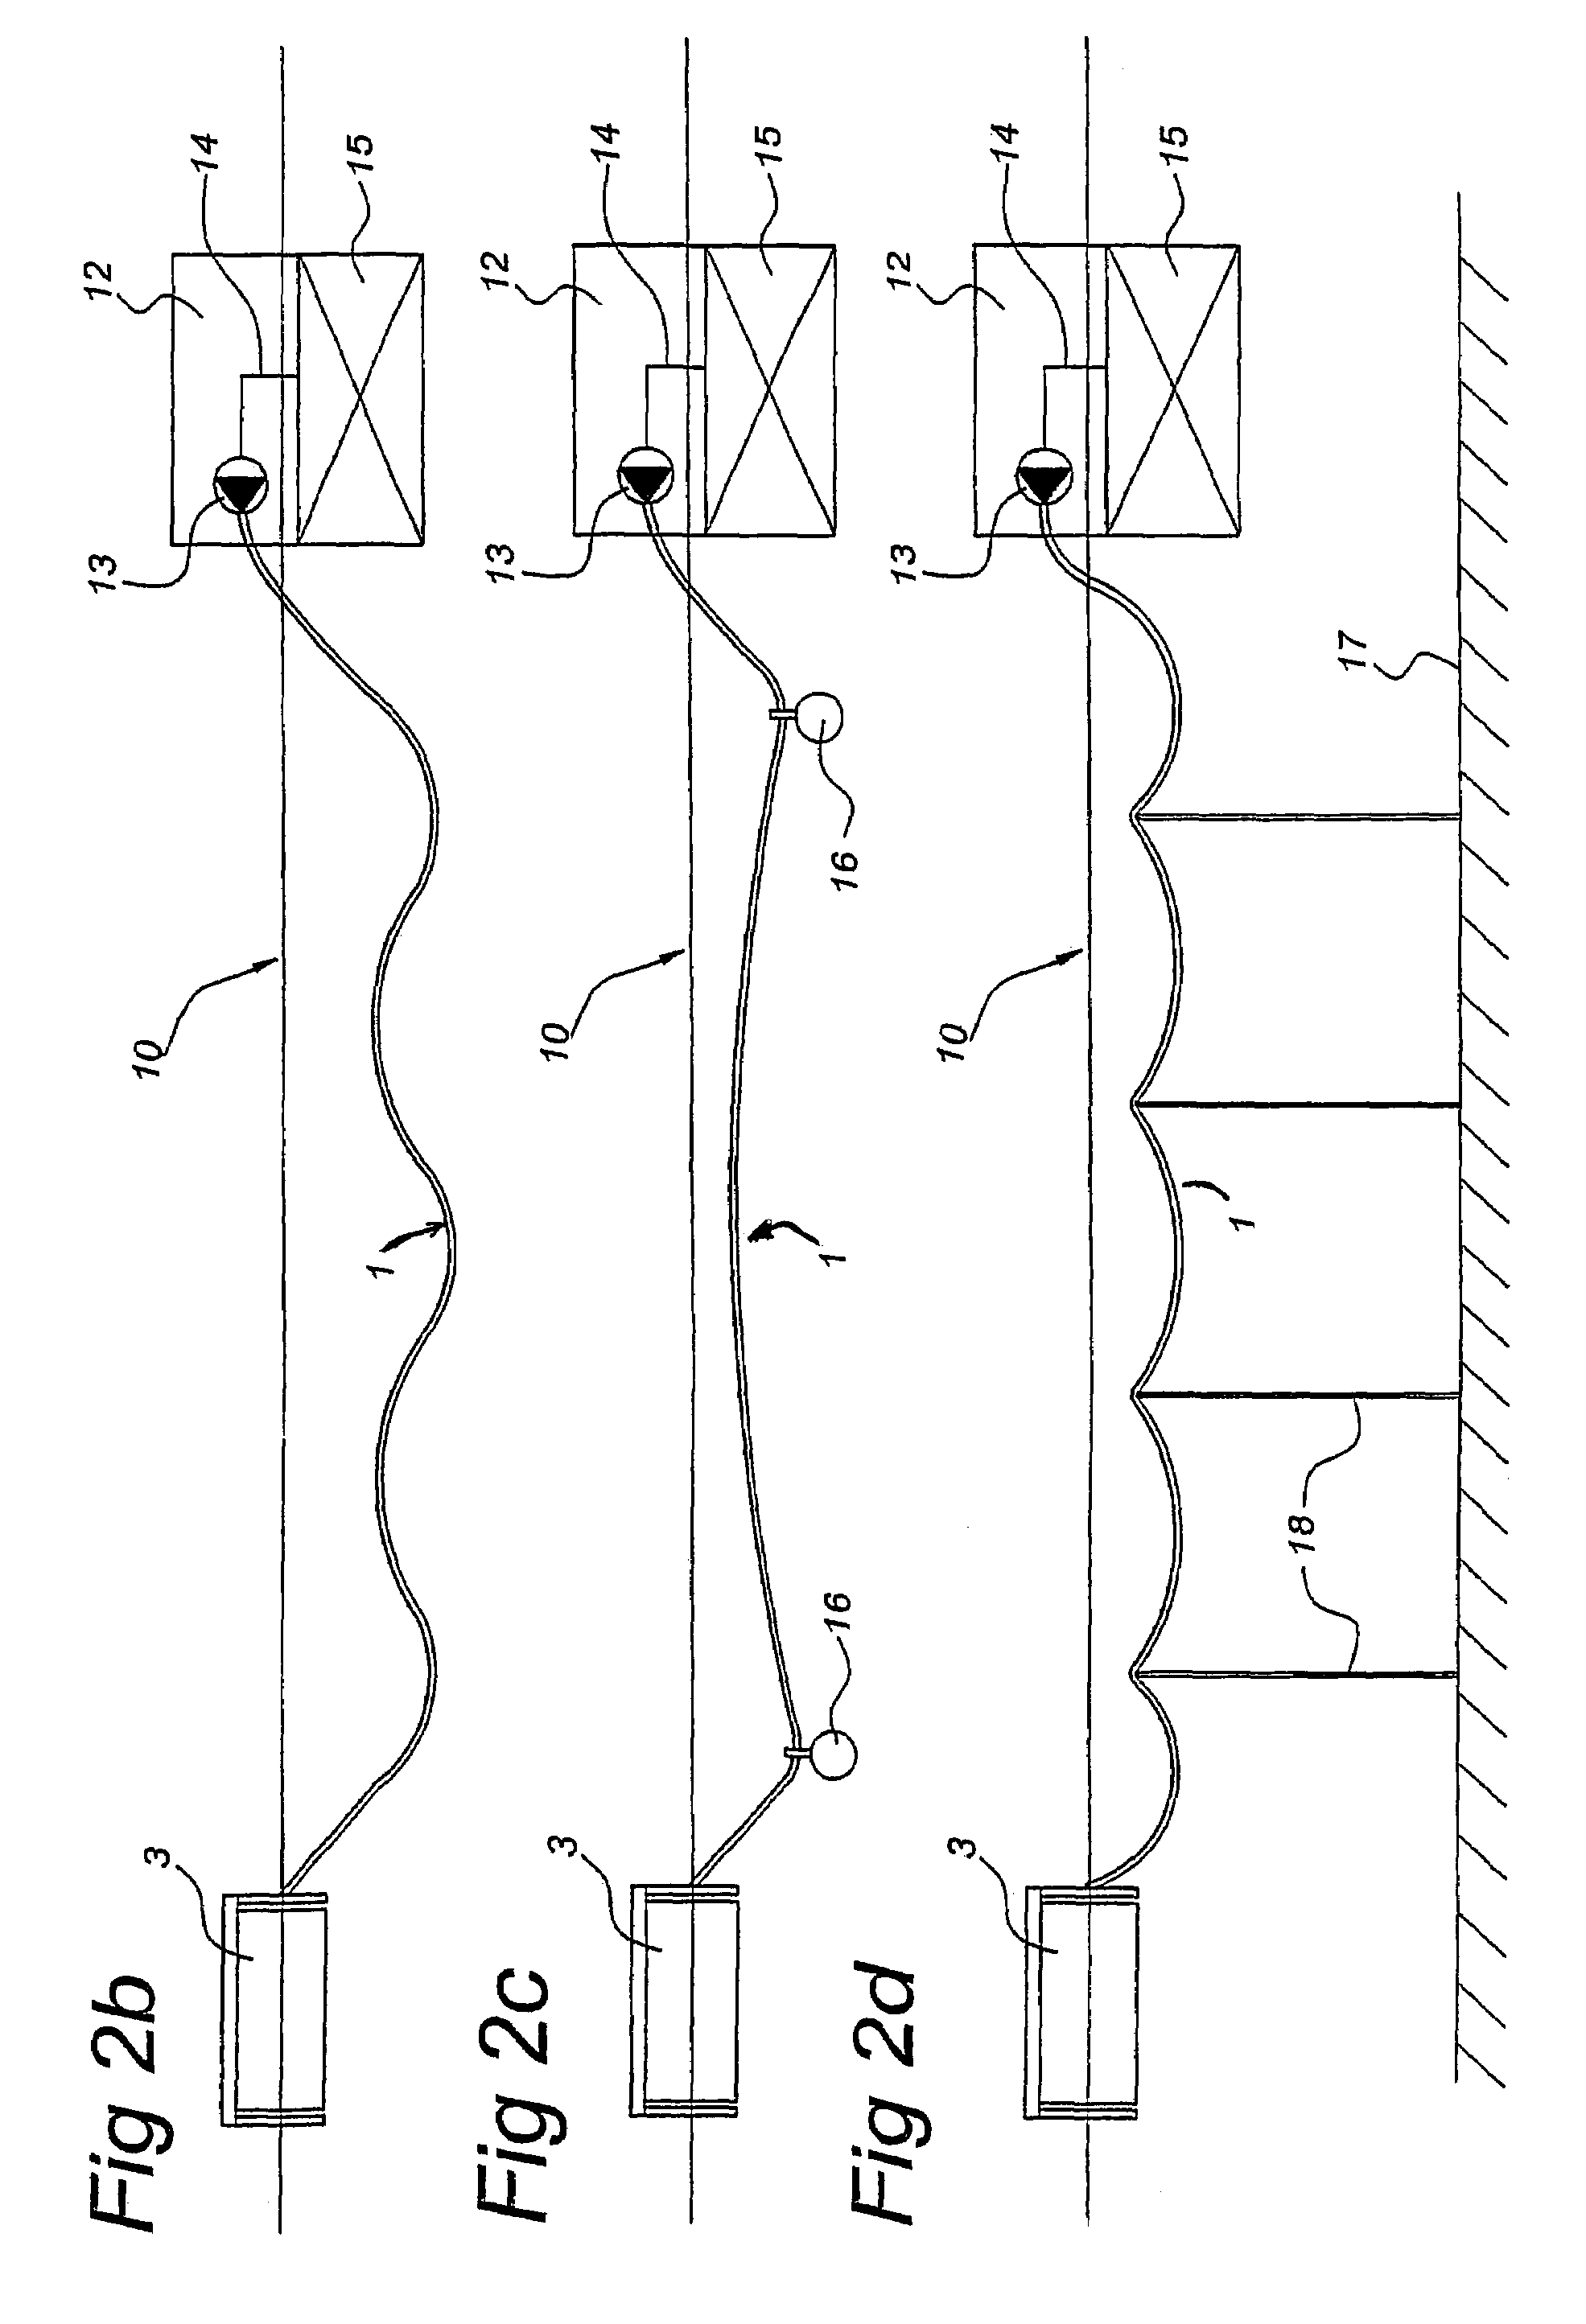 Method of supplying oil from a floating production structure to an offloading buoy via a thermally insulated flexible transfer duct